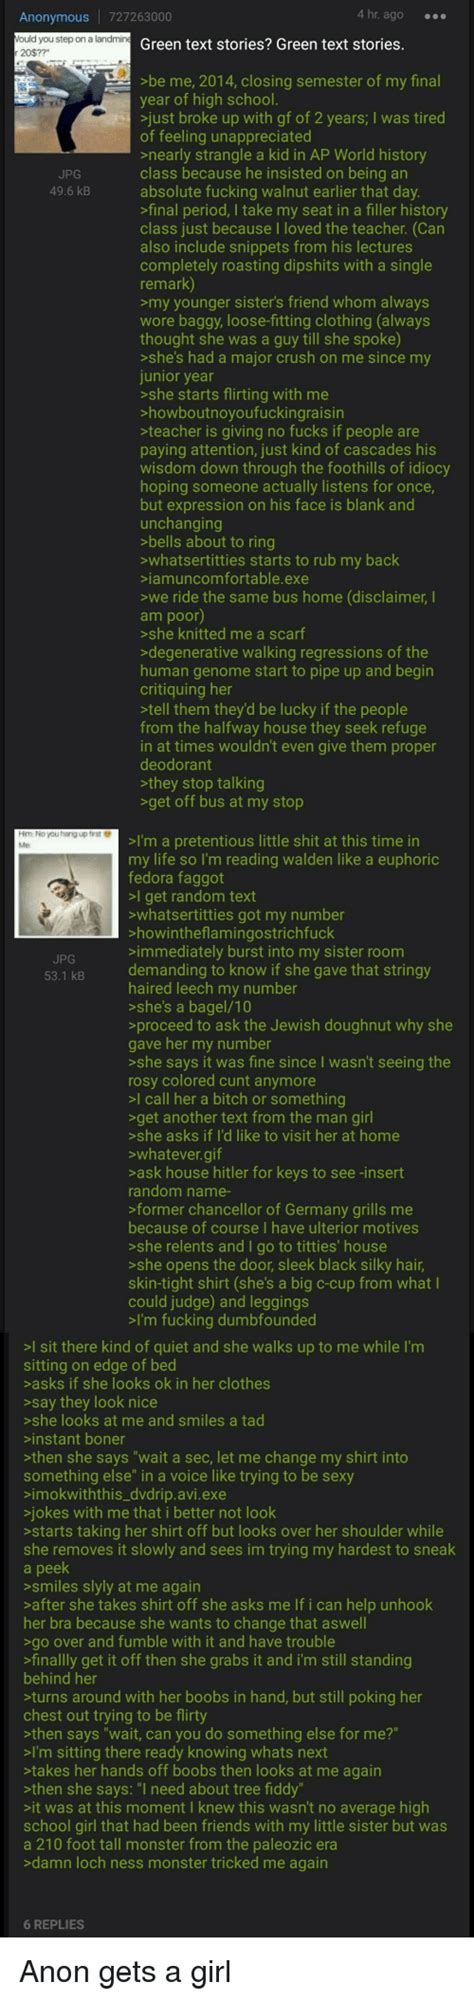 green text stories green text stories be me 2014 closing